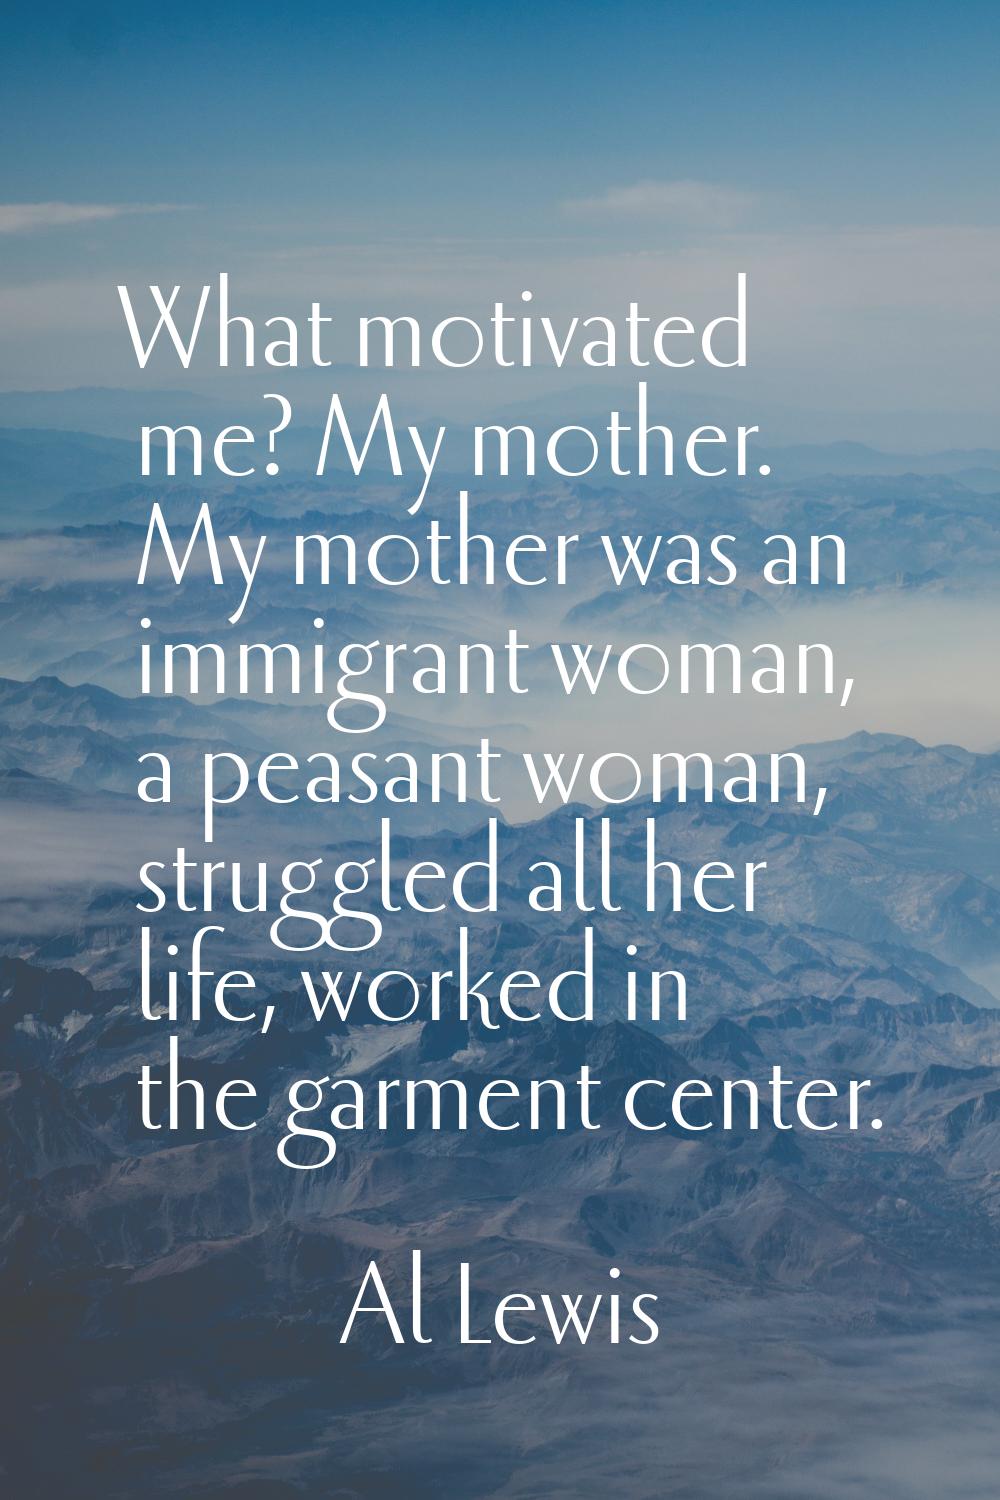 What motivated me? My mother. My mother was an immigrant woman, a peasant woman, struggled all her 